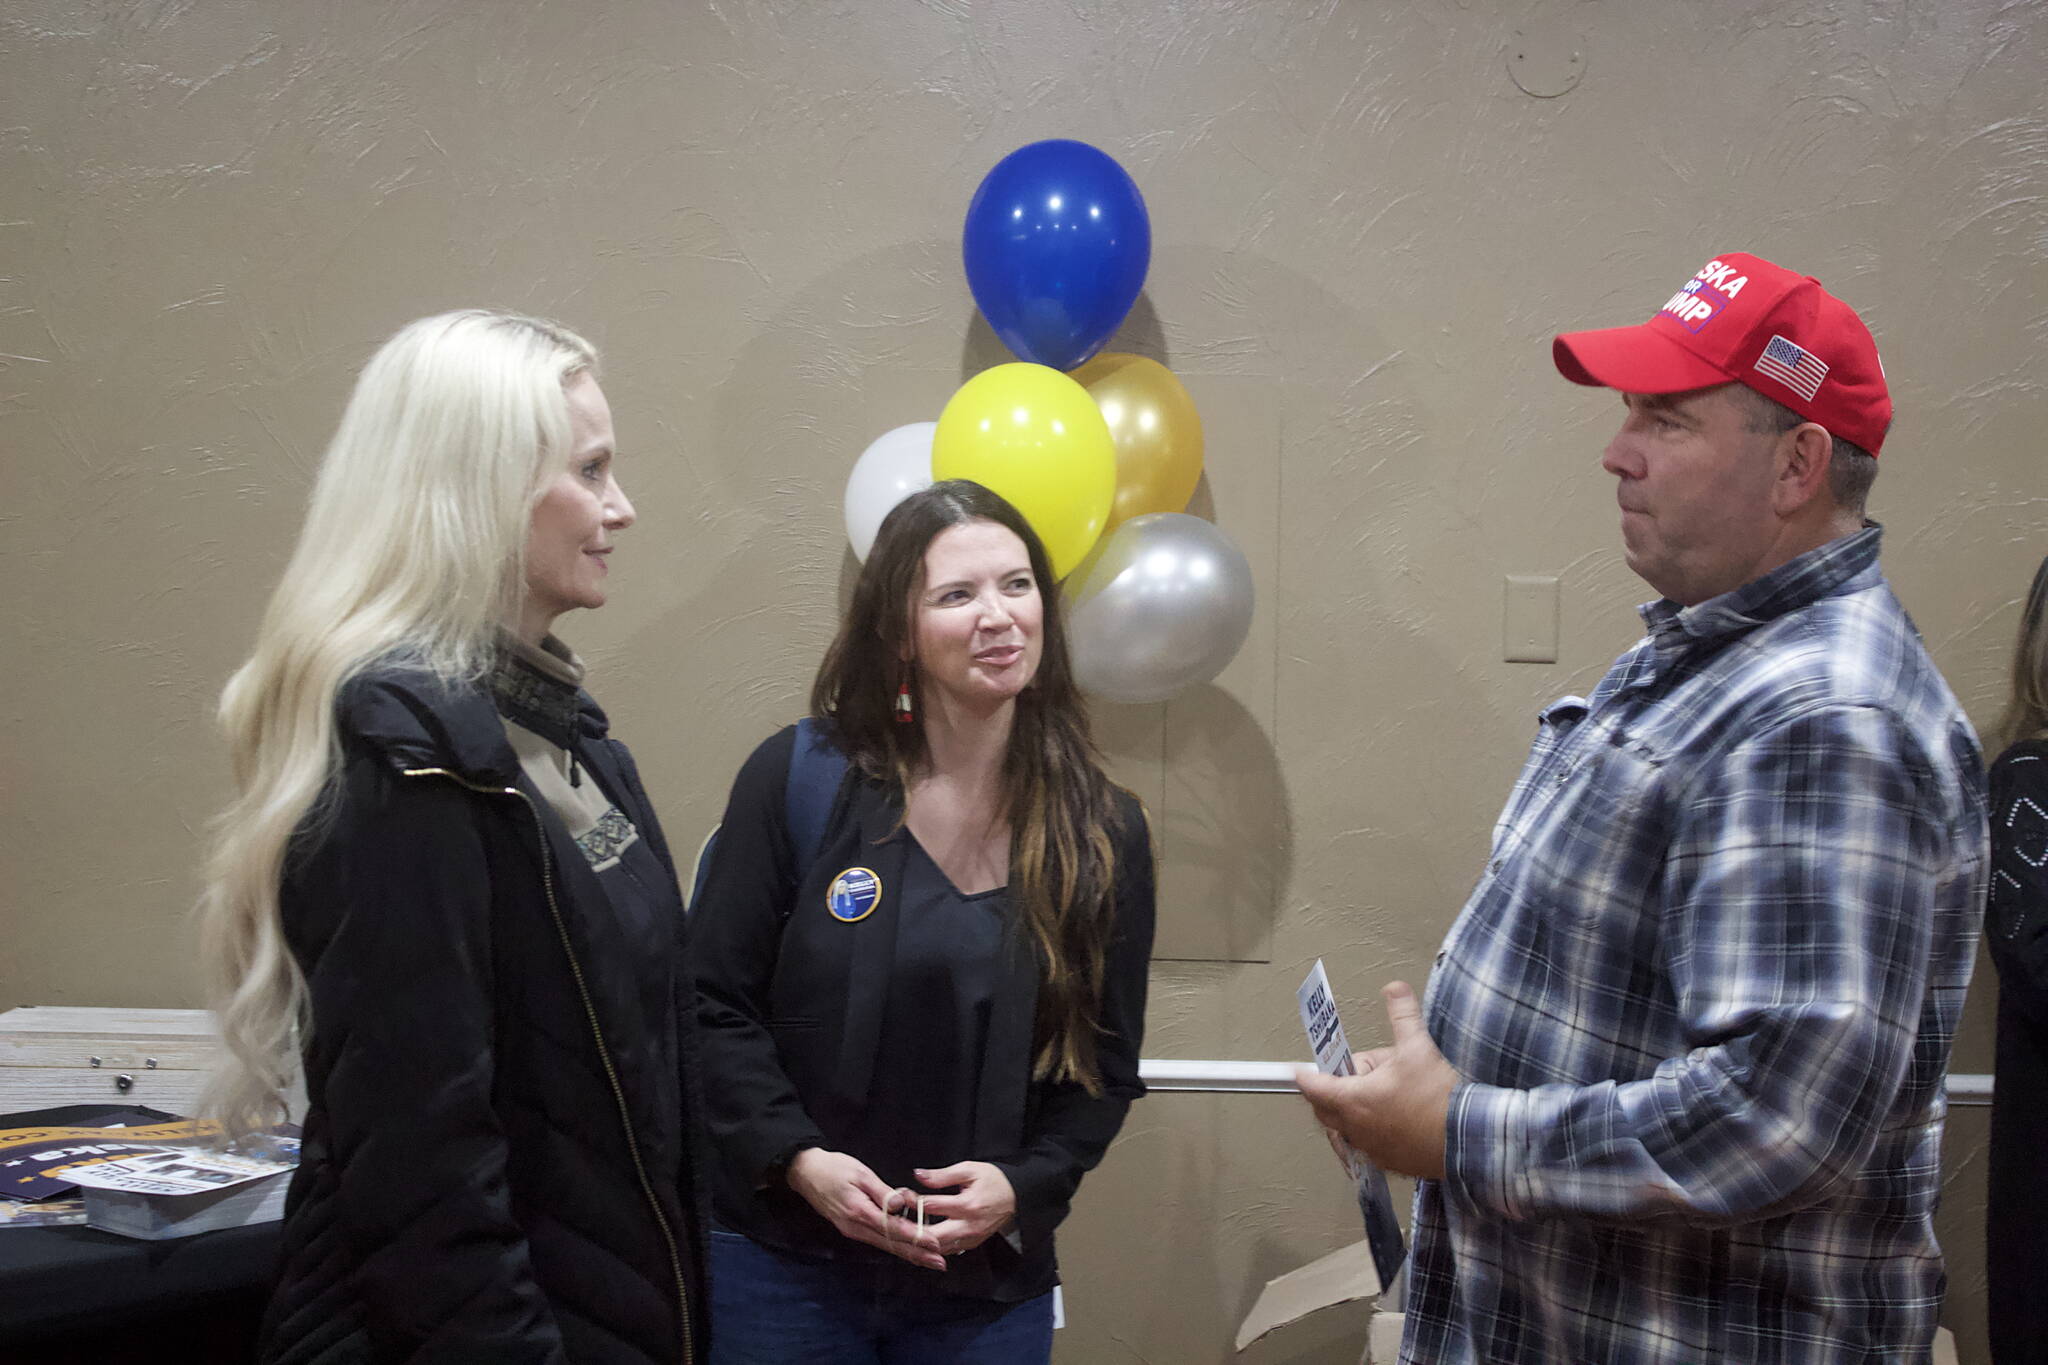 Patrick Phillips, right, a dock officer who has been a Juneau resident for 26 years, chats with Republican U.S. Senate candidate Kelly Tshibaka before the start of a meet-and-greet at Juneau Christian Center on Friday. He said he is voting for Tshibaka largely based on her stance on national issues. (Mark Sabbatini / Juneau Empire)